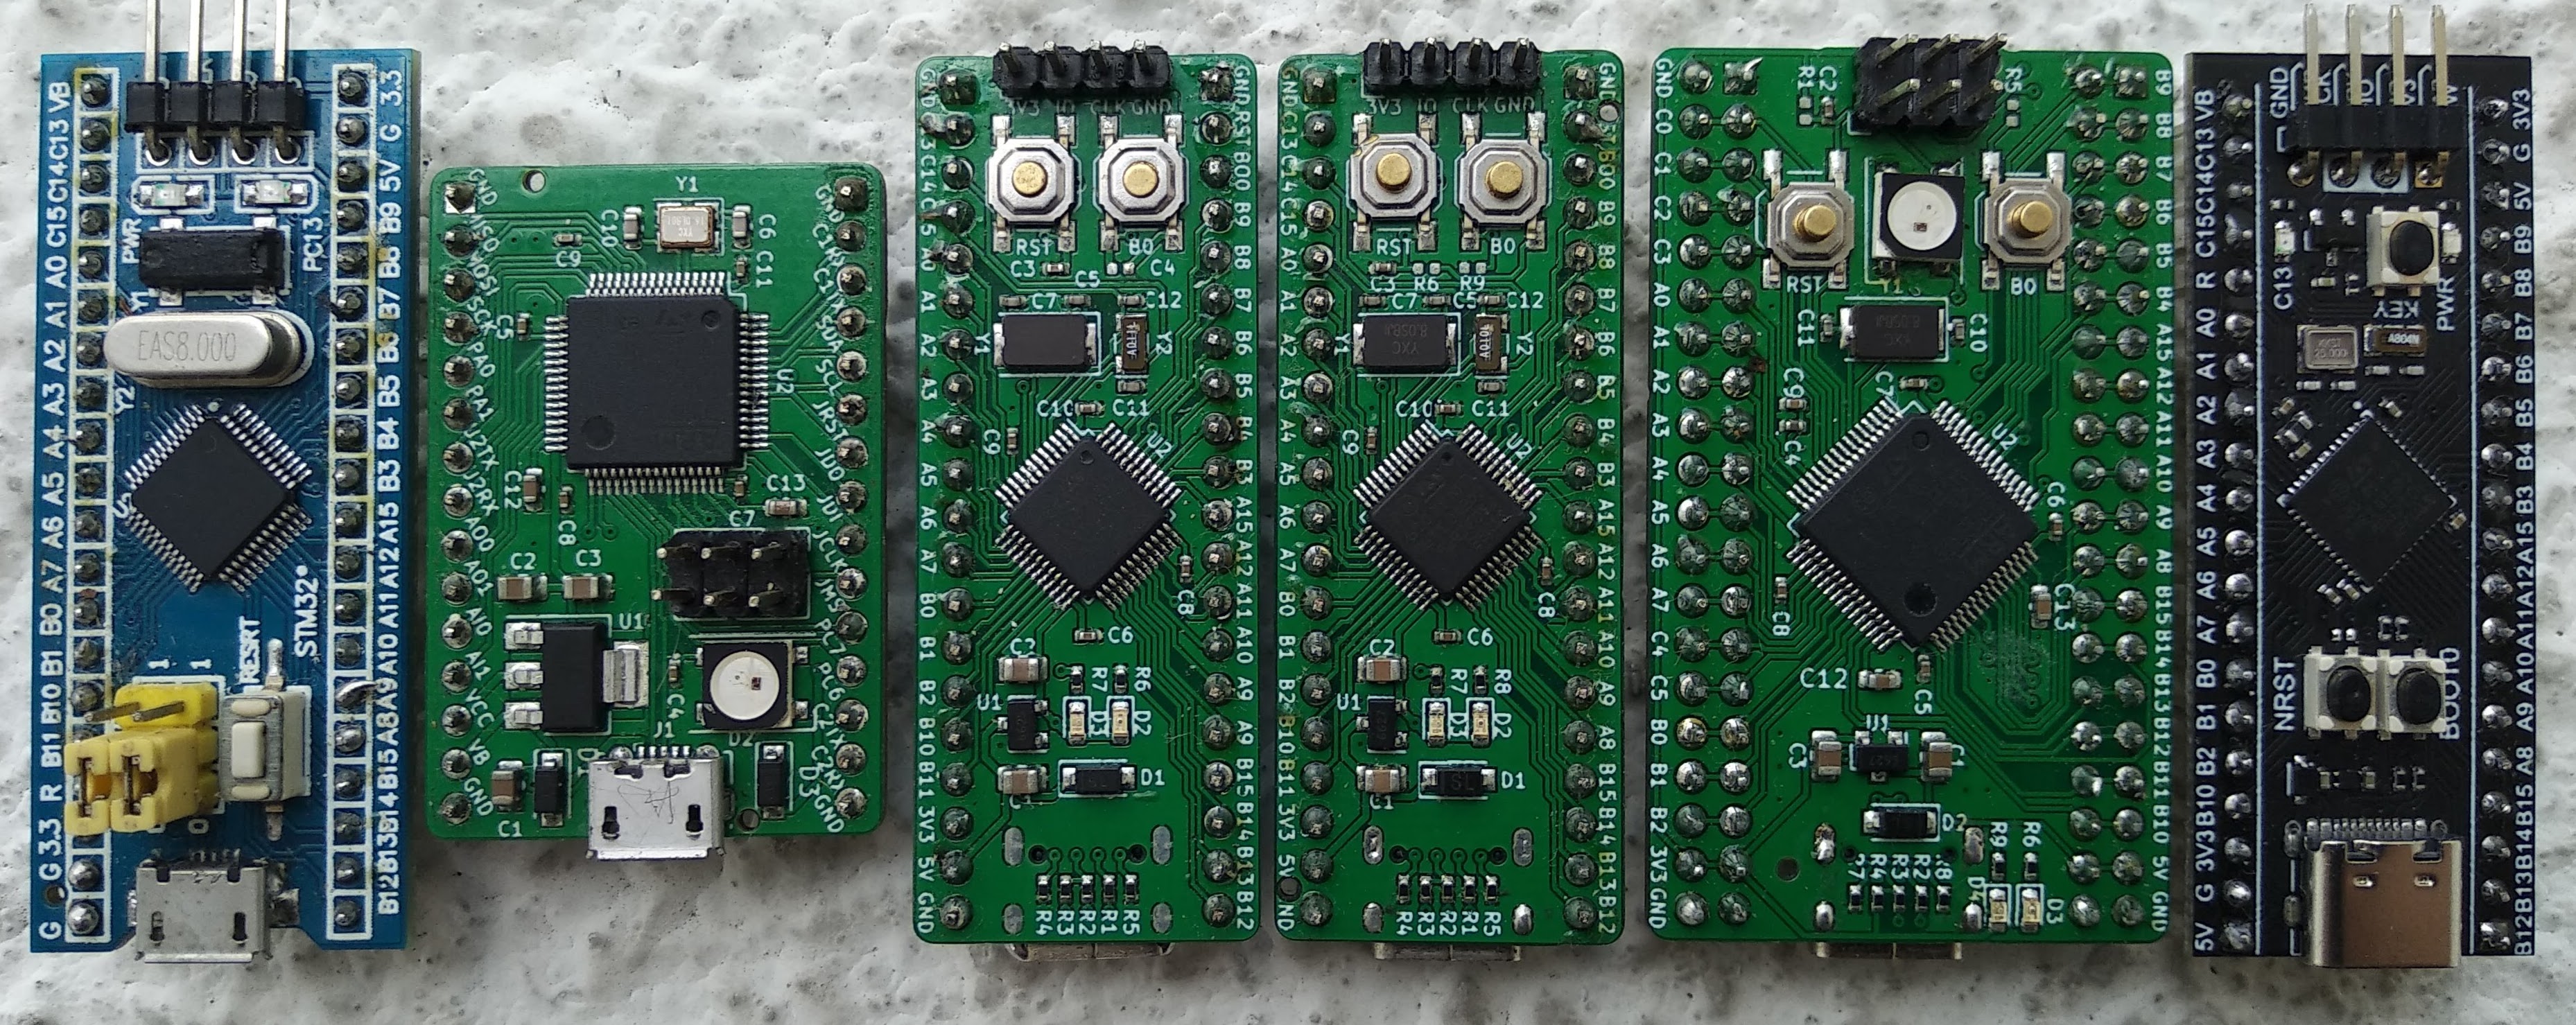 Random collection of STM32 Development Boards - some bought and some home made